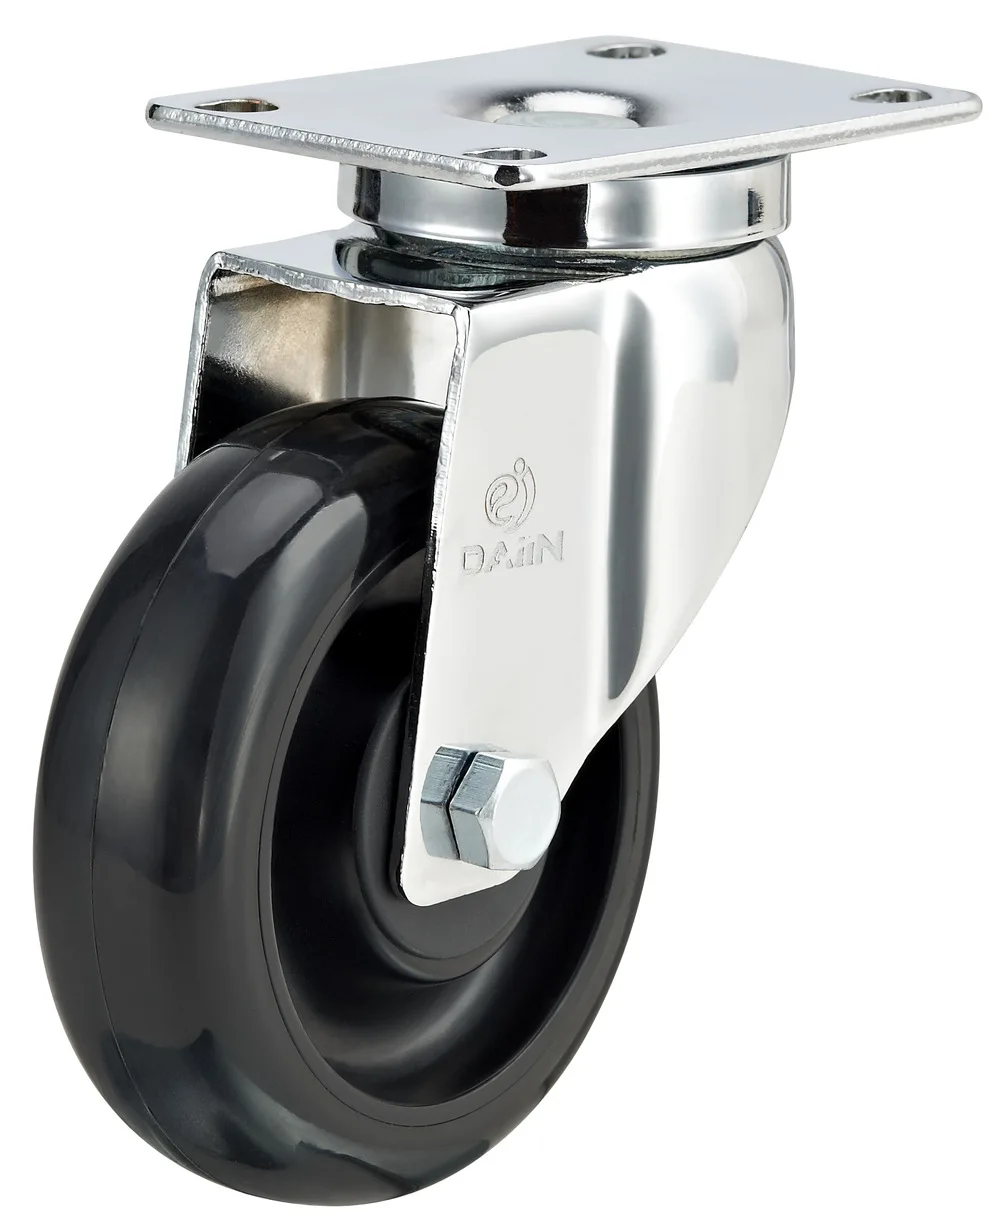 Top plate antistatic swivel caster esd PU caster wheels